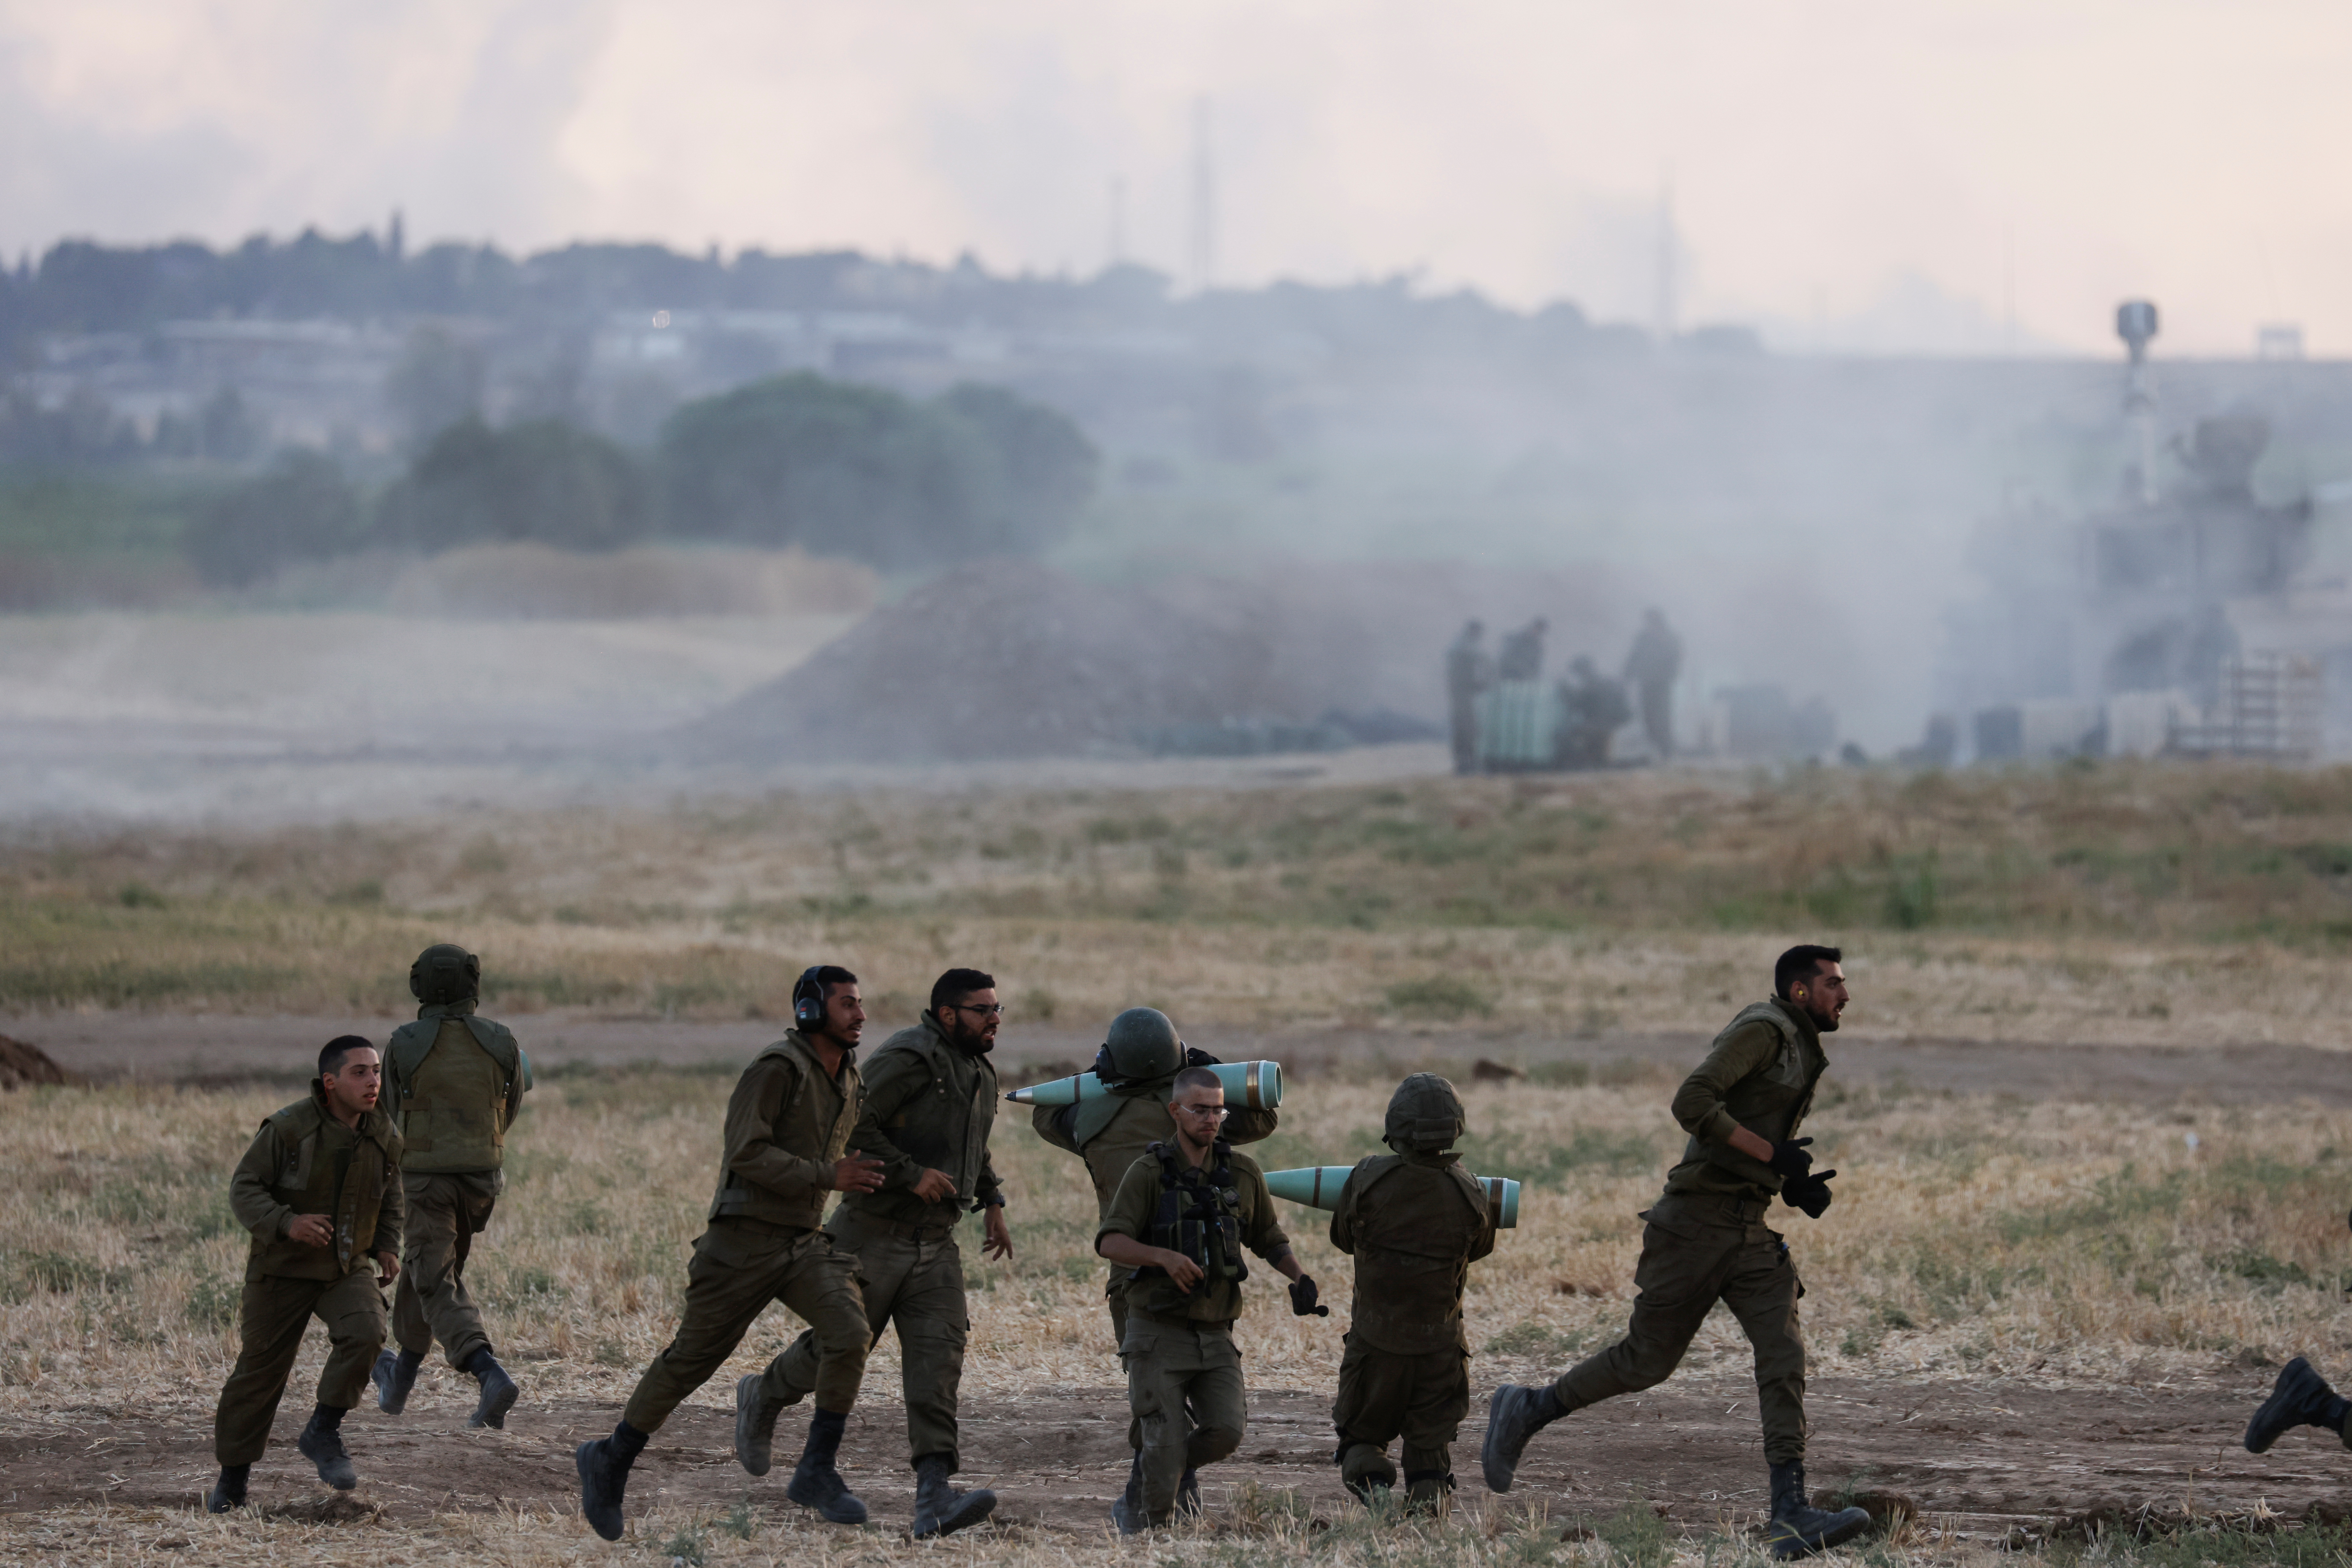 Israeli soldiers carry artillery shells and run in a field near the border between Israel and the Gaza Strip, on its Israeli side May 17, 2021. REUTERS/Amir Cohen